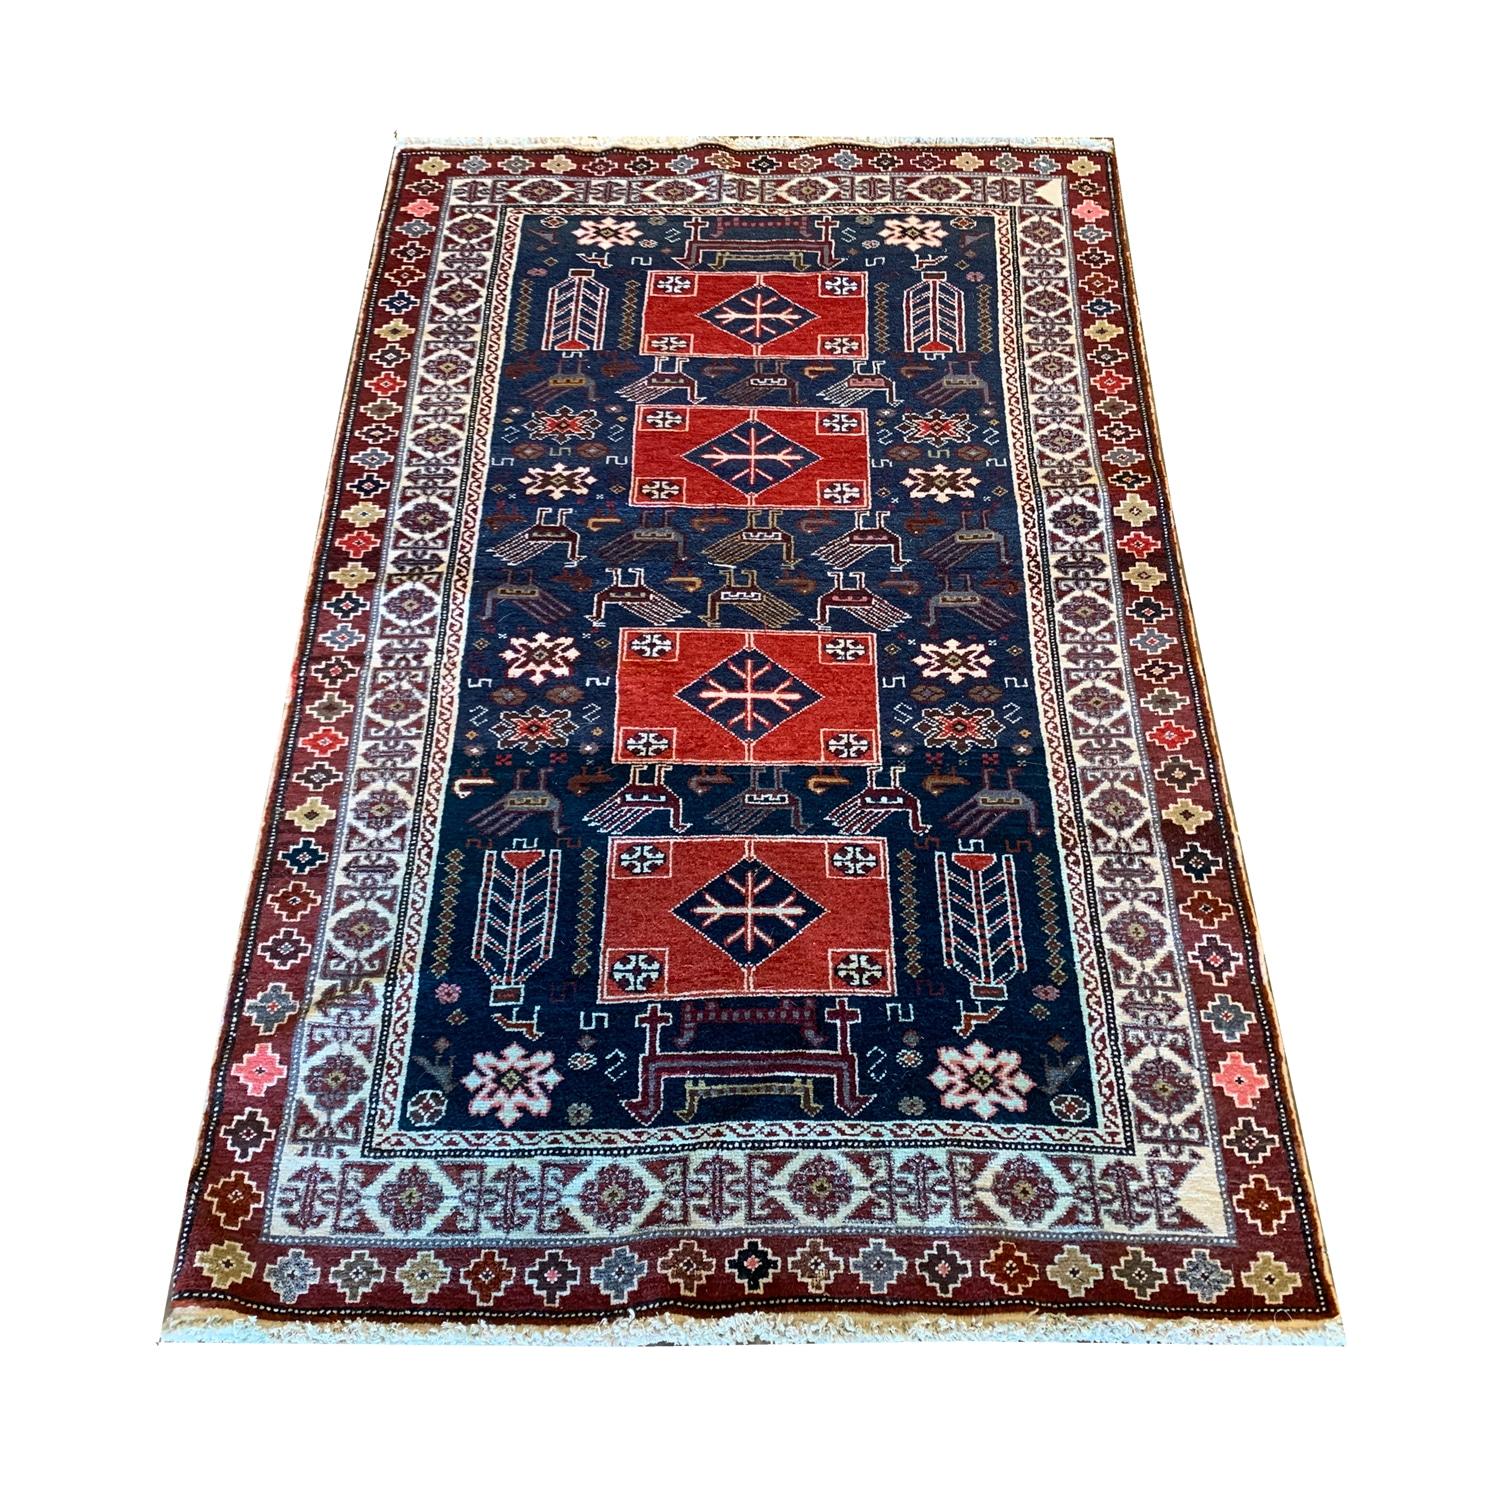 Introducing our exquisite antique collectible rug, originating from Azerbaijan in the late 19th century, circa 1880. This vintage rug boasts a rich history, hand-knotted with meticulous craftsmanship by skilled artisans. Adorned with captivating